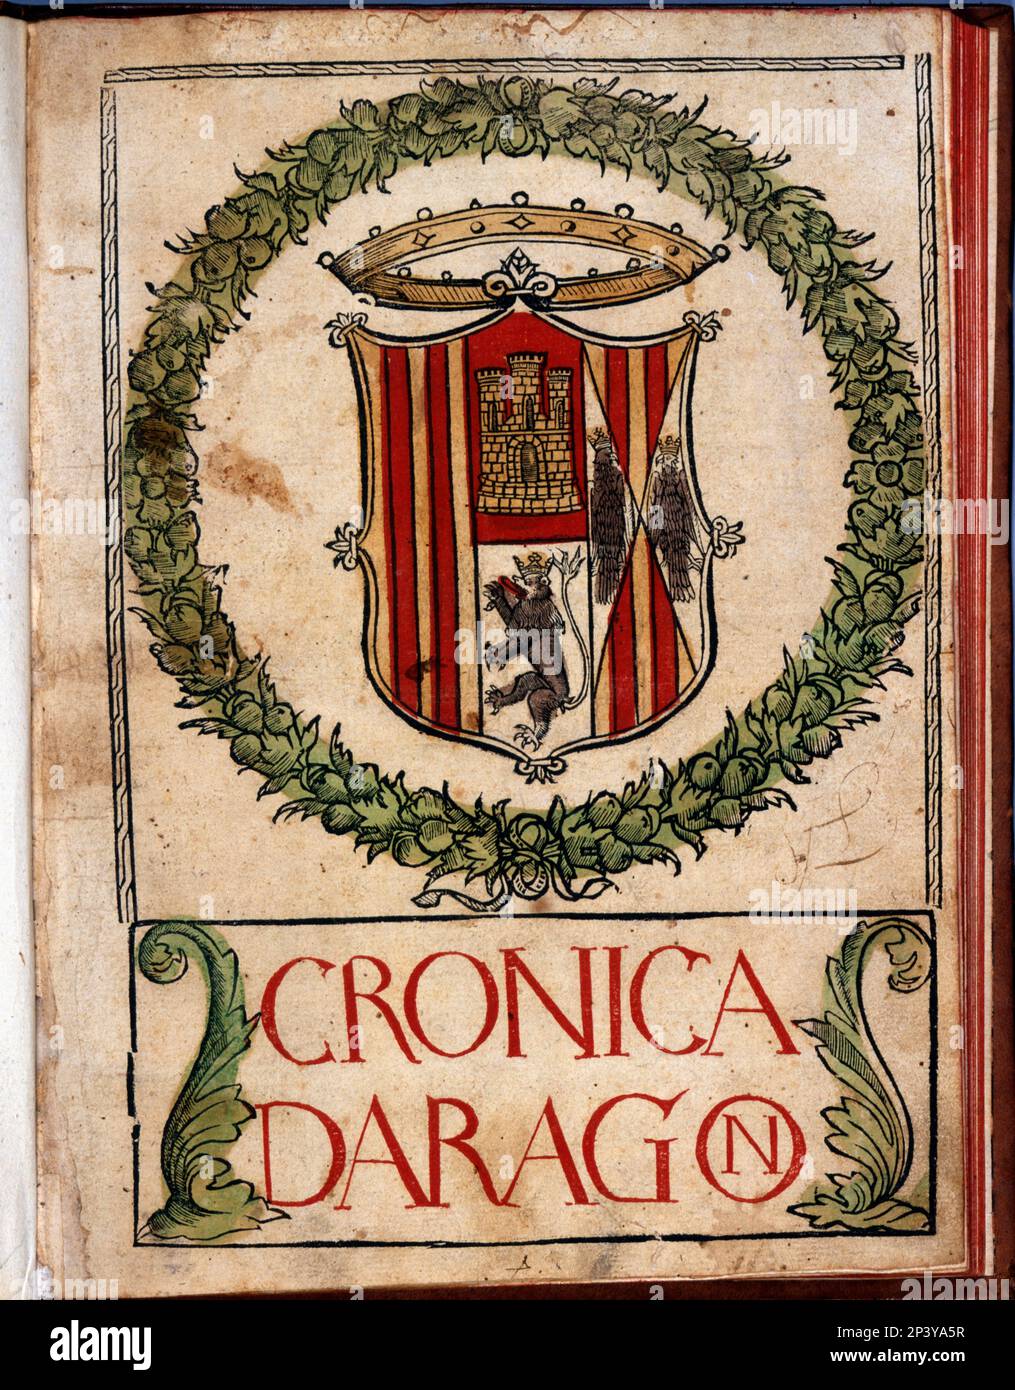 Xylographic color cover with a large coat of arms of Aragon from 'Cr&#xf3;nica de Arag&#xf3;n' (Chronicle of Aragon). First Castilian edition with Gothic lettering. Printed in Valencia by Juan Gofr&#xe9; in 1524. Stock Photo